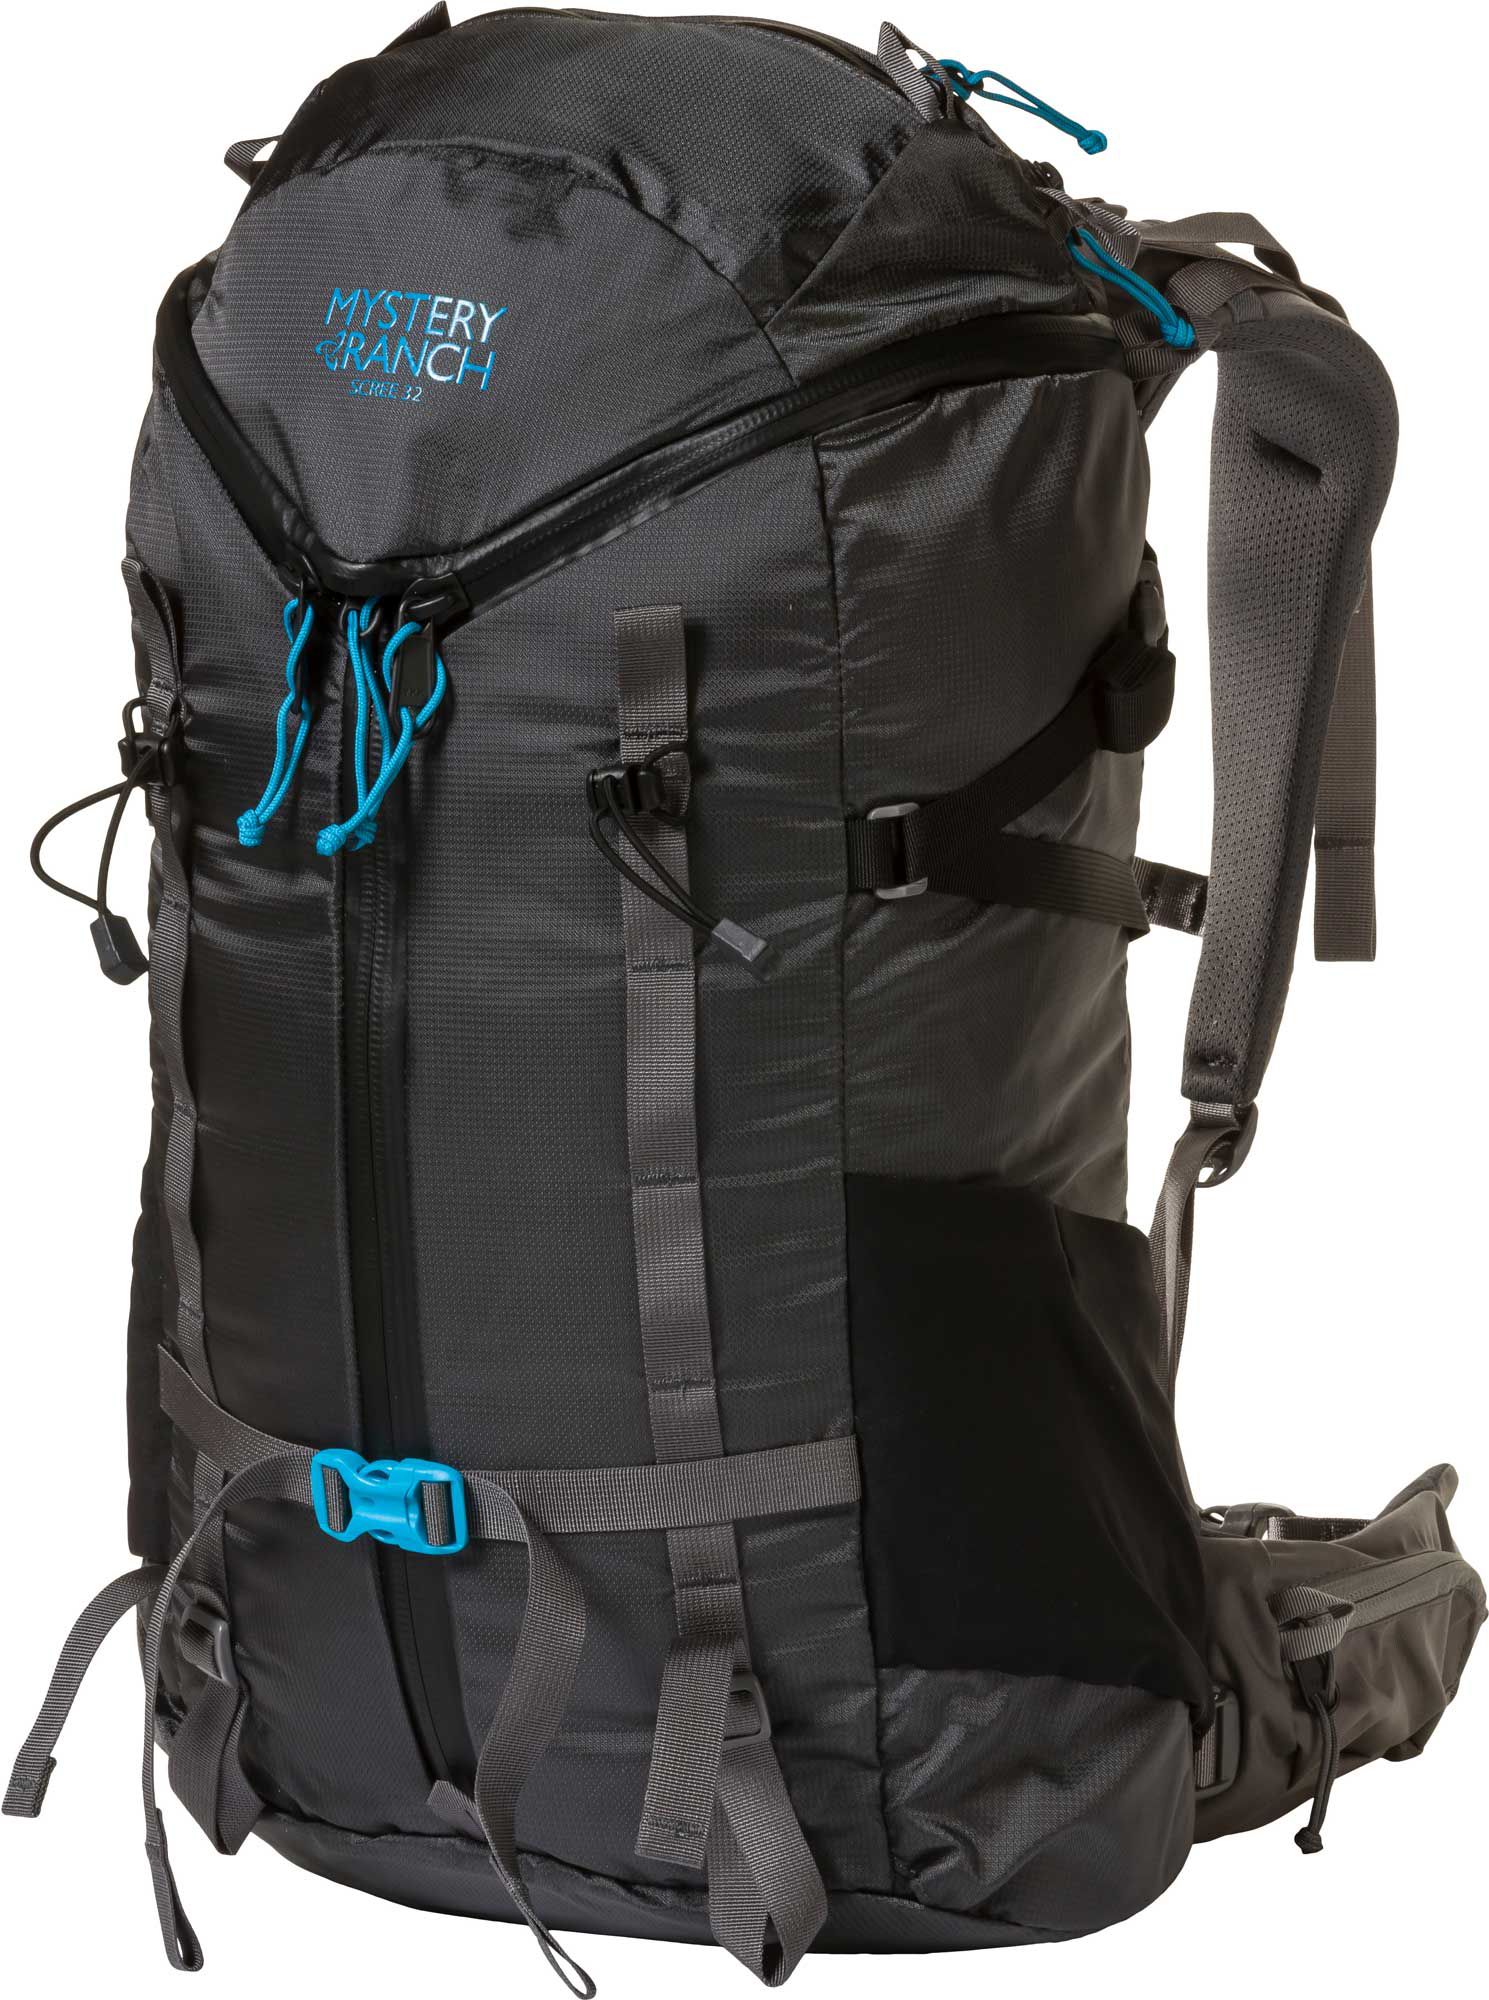 Photos - Knife / Multitool Mystery Ranch Women's Scree 32L Pack, XS/S, Shadow Moon 21ZZFWSCR32WMNSXXC 